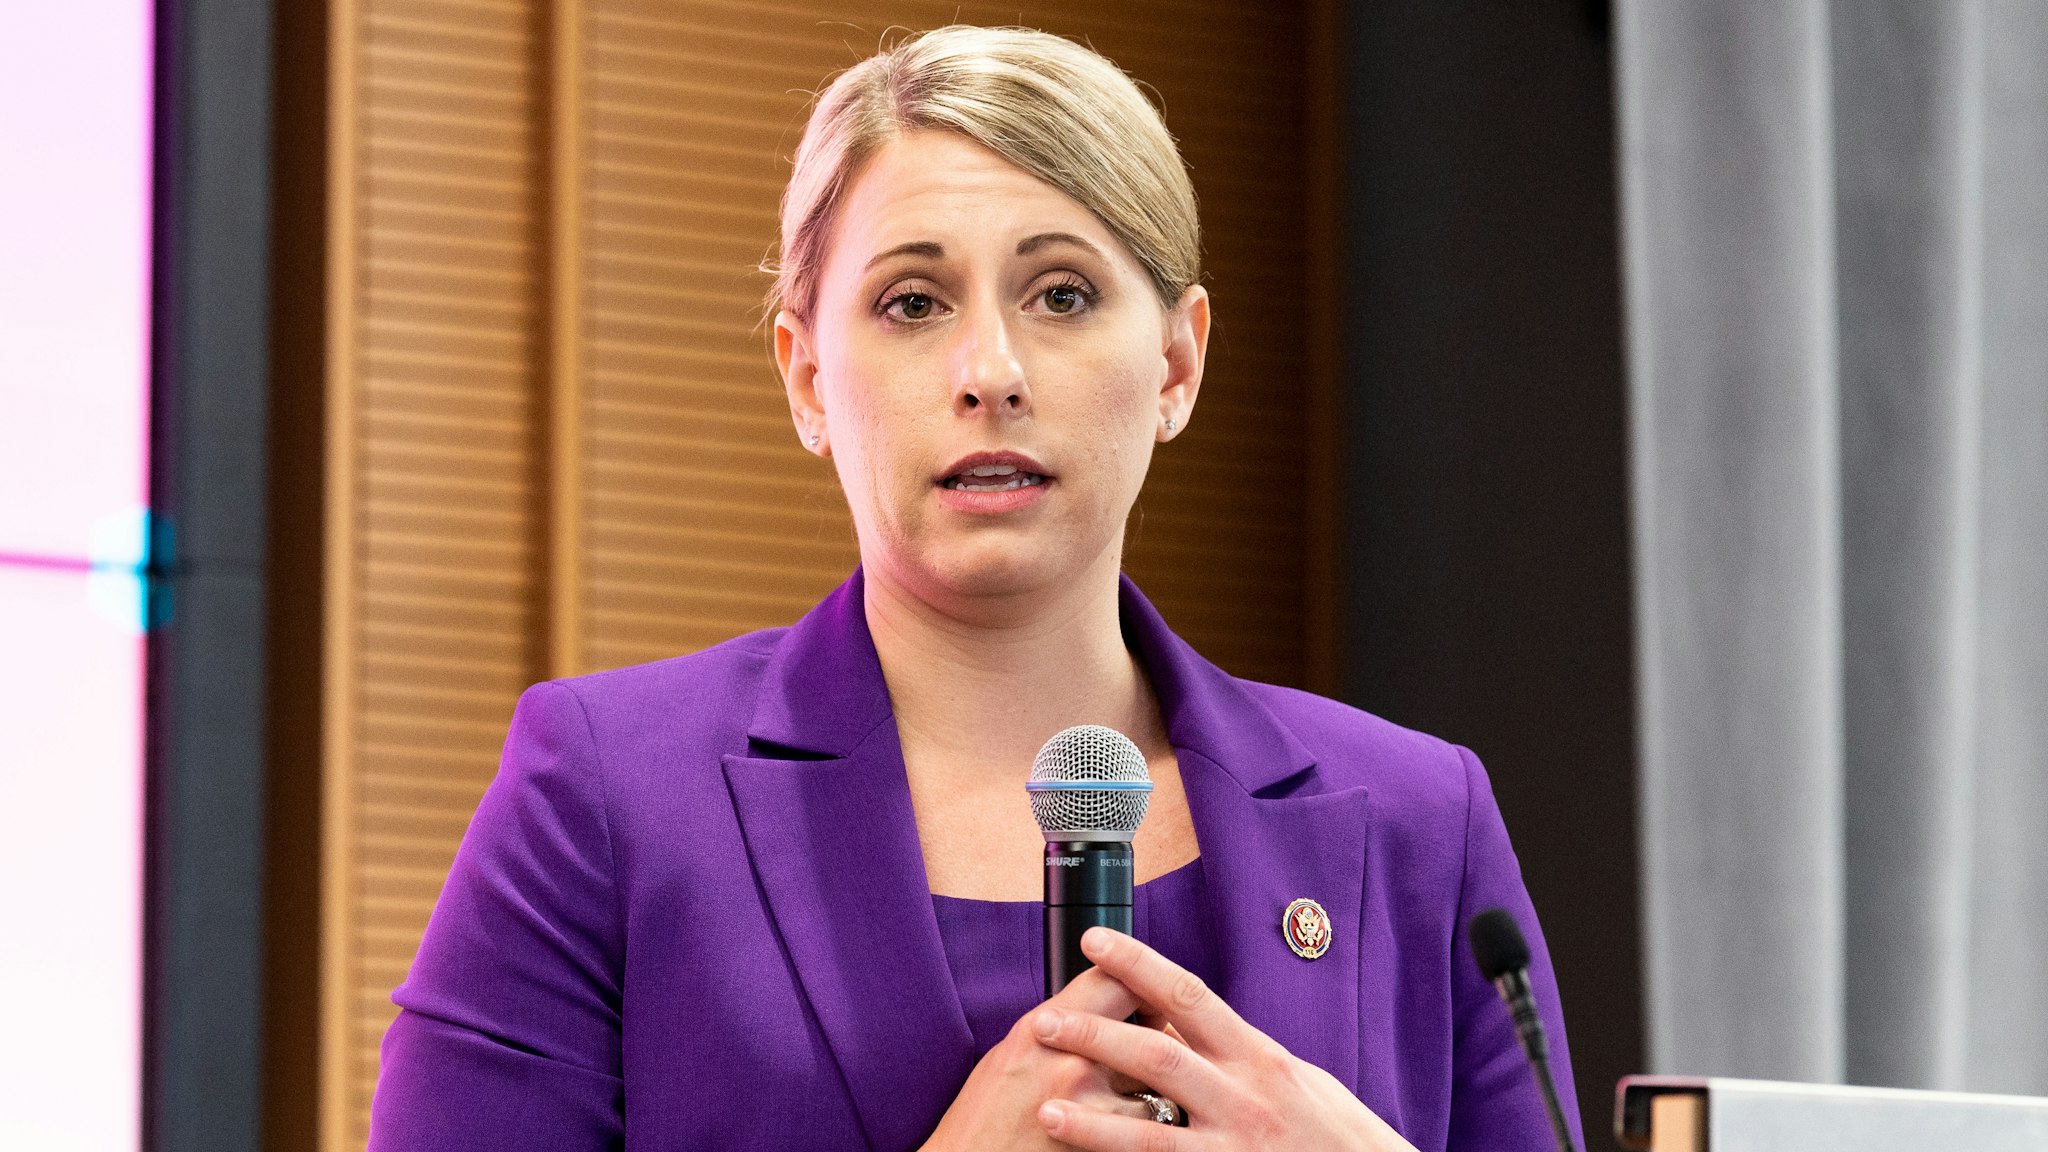 U.S. Representative Katie Hill (D-CA) speaking at the Ignite Young Women Run D.C. Conference in Washington, DC.